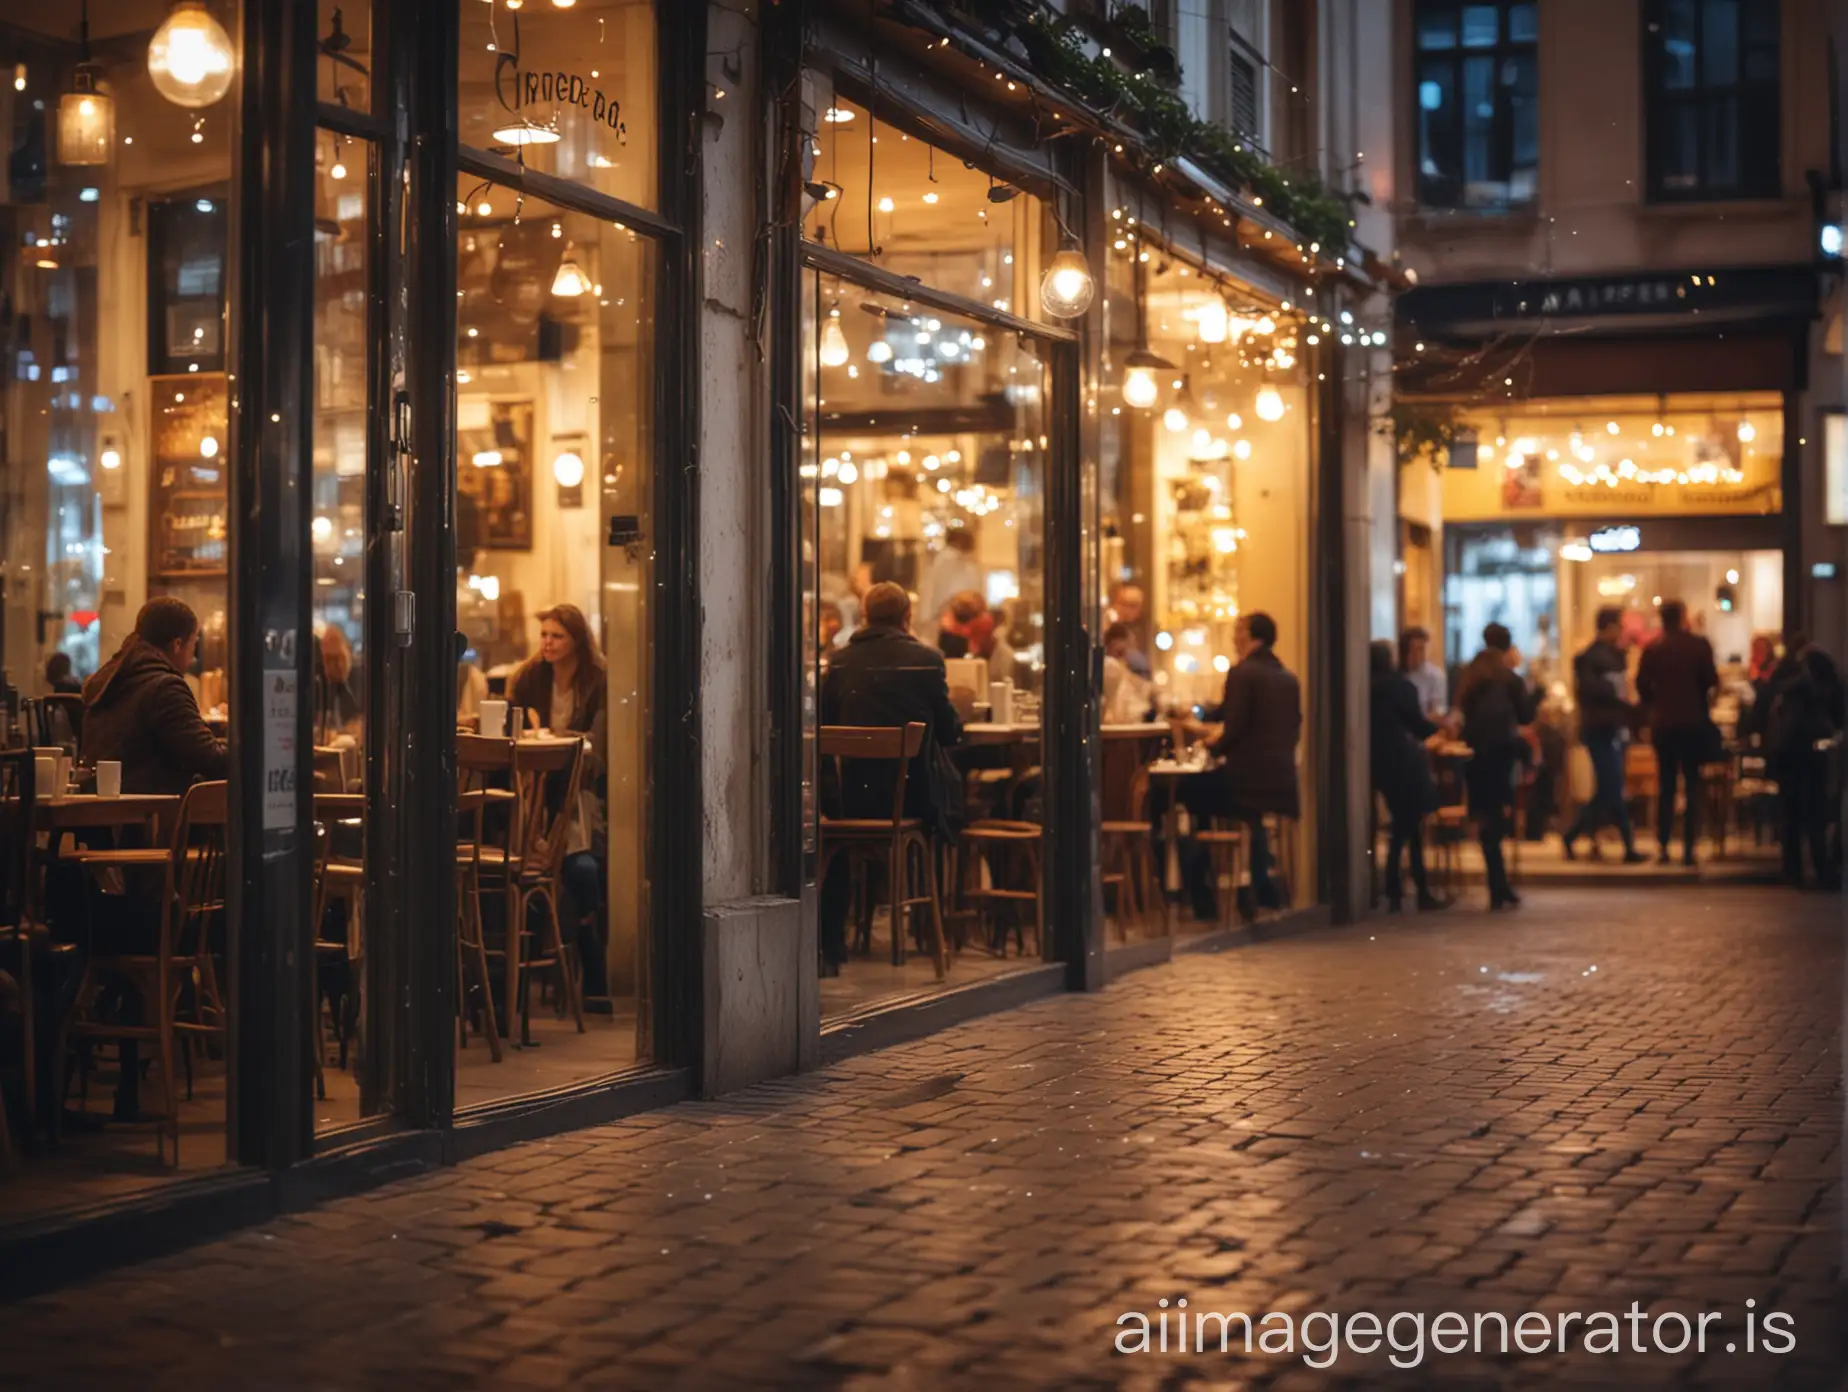 Urban-Cafe-Interior-with-Street-Reflections-and-Soft-Bokeh-Lights